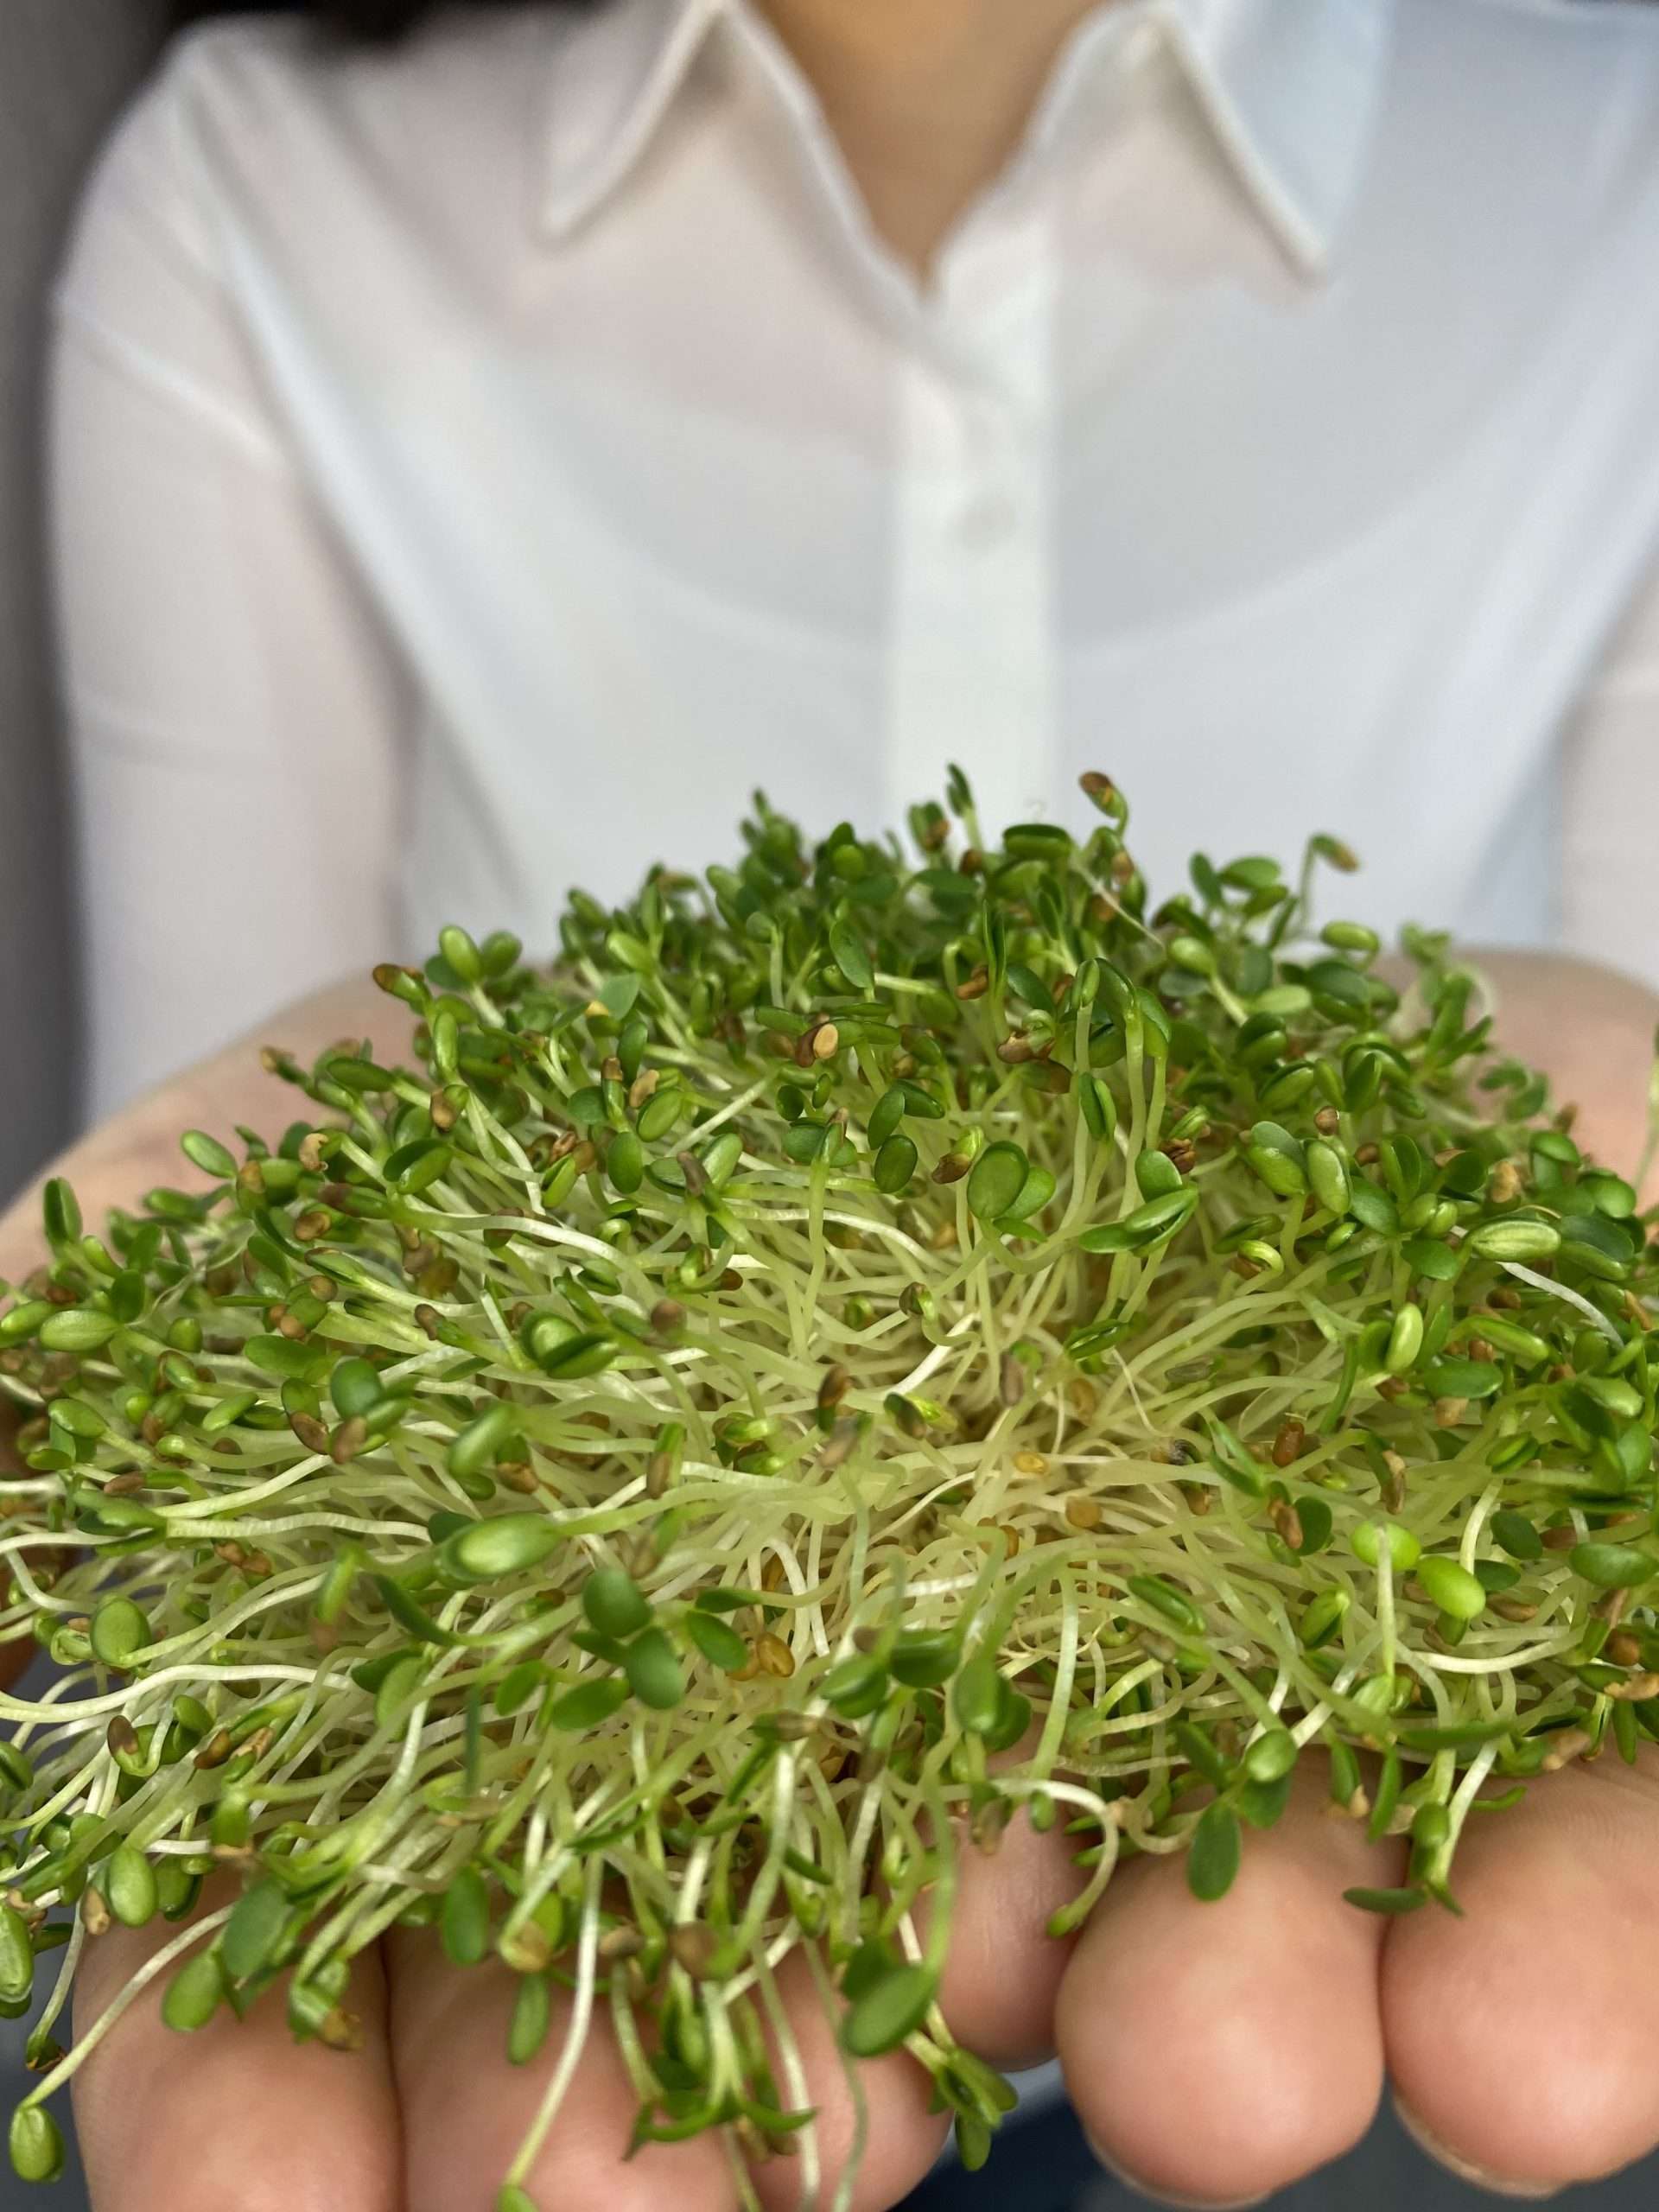 Are sprouts a superfood?